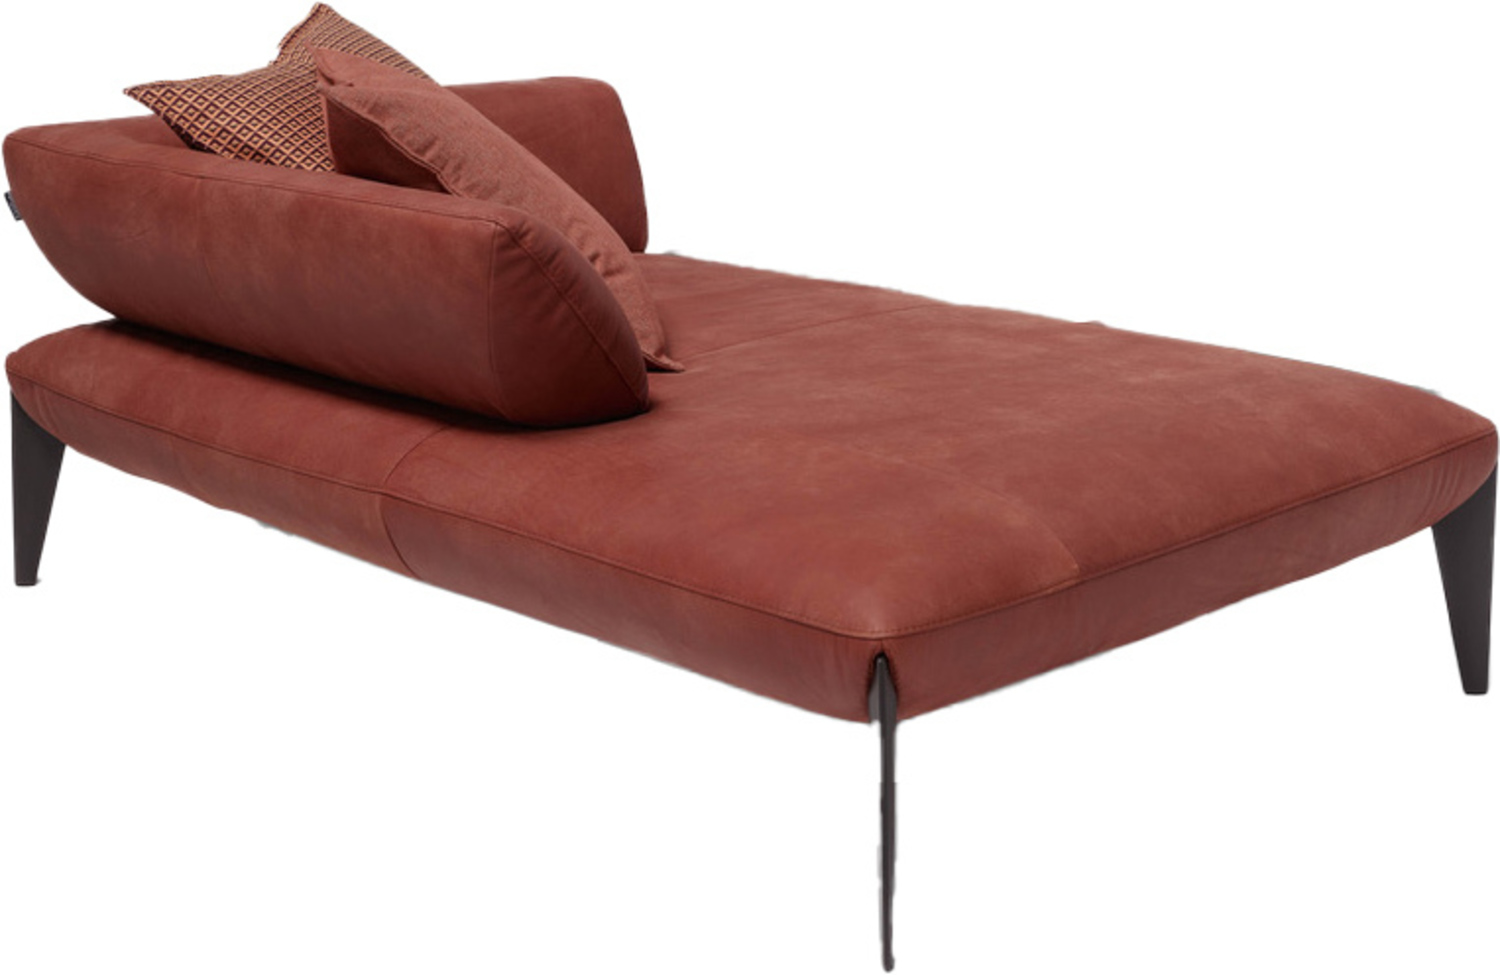 Avenue Chaise Lounge with Two Cushions.